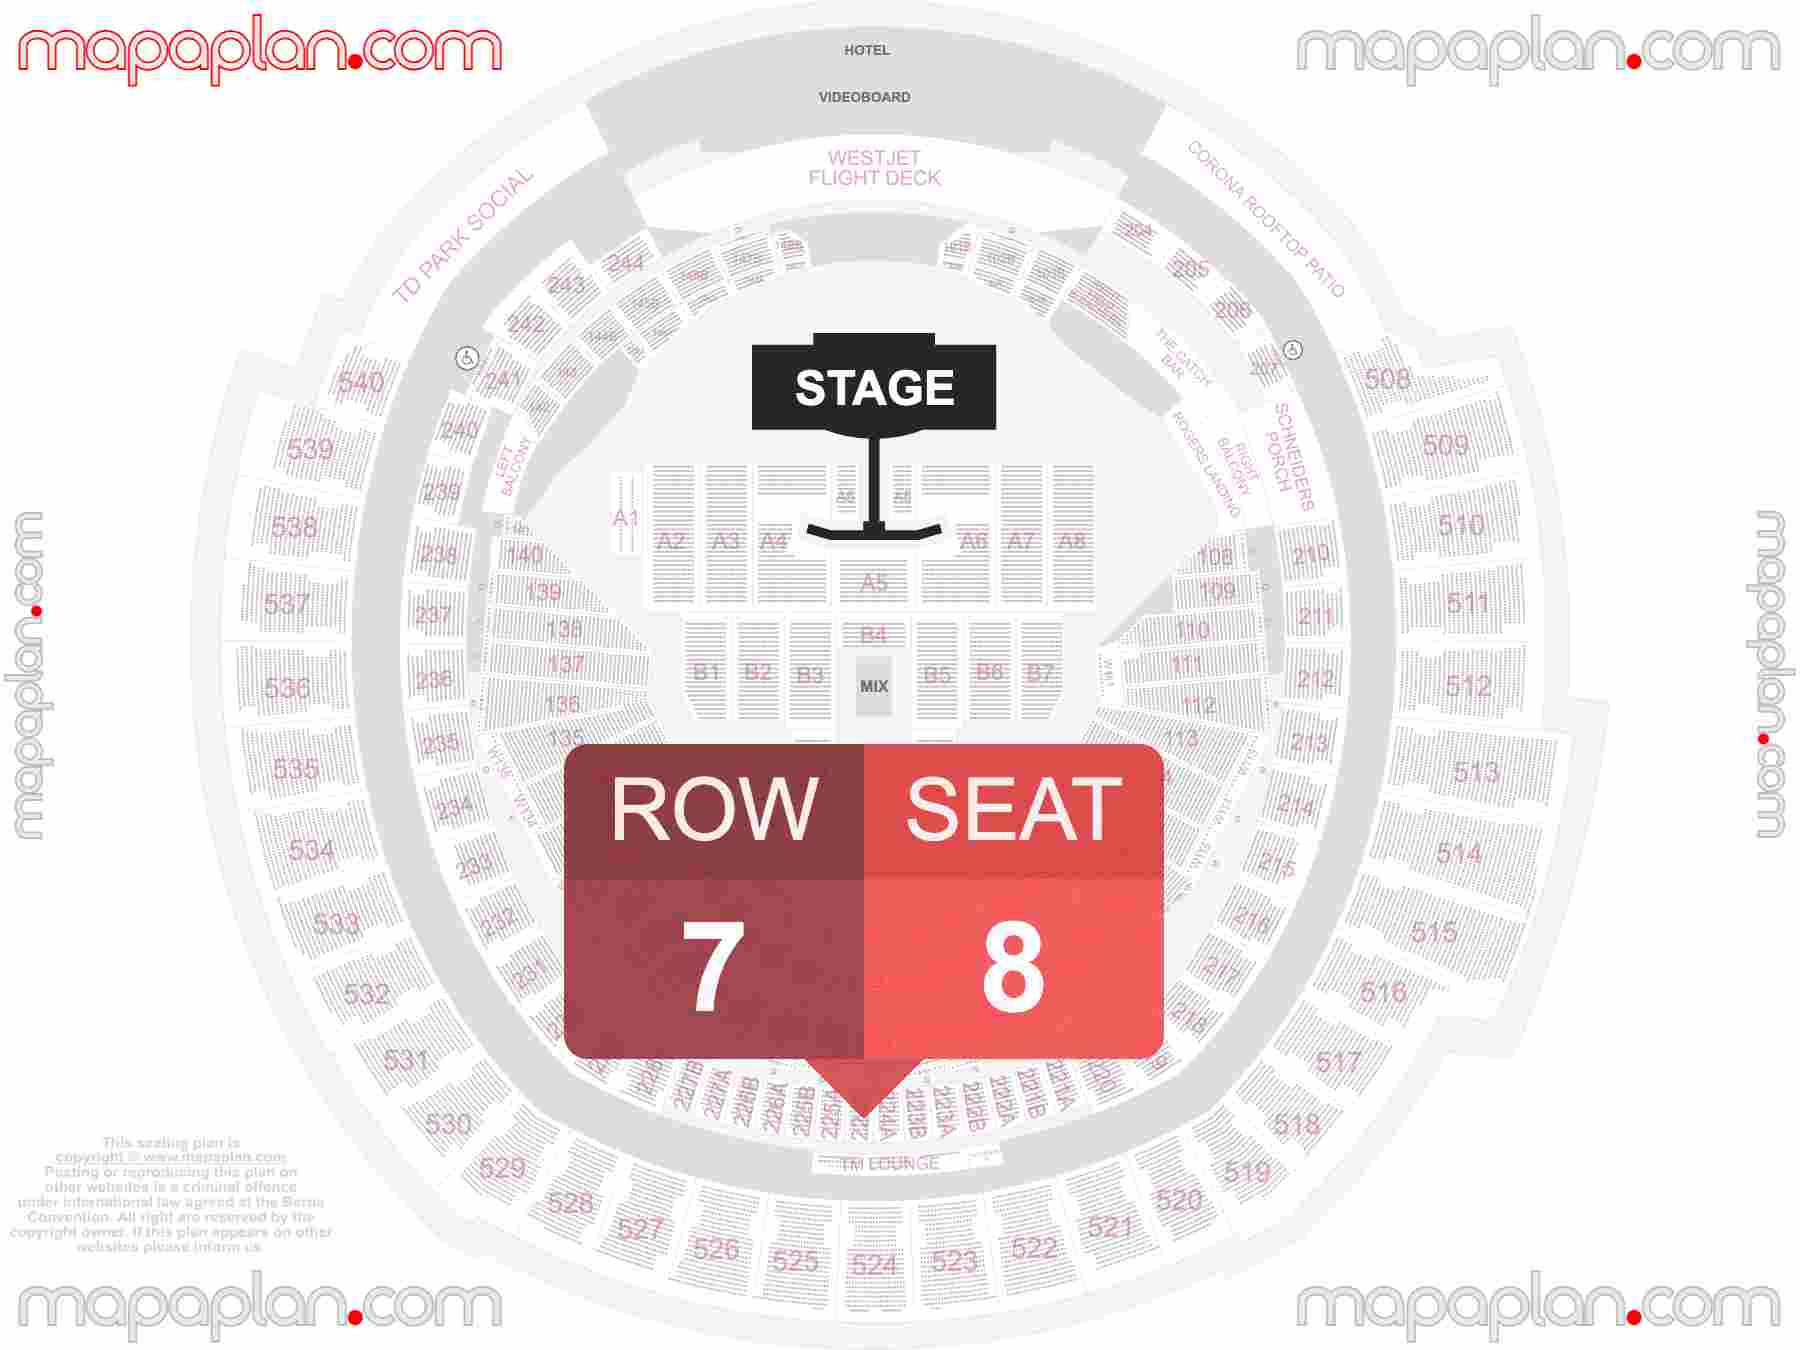 Toronto Rogers Centre seating map Concert with extended catwalk runway stage interactive seating checker map chart showing seat numbers per row - Ticket prices sections review diagram